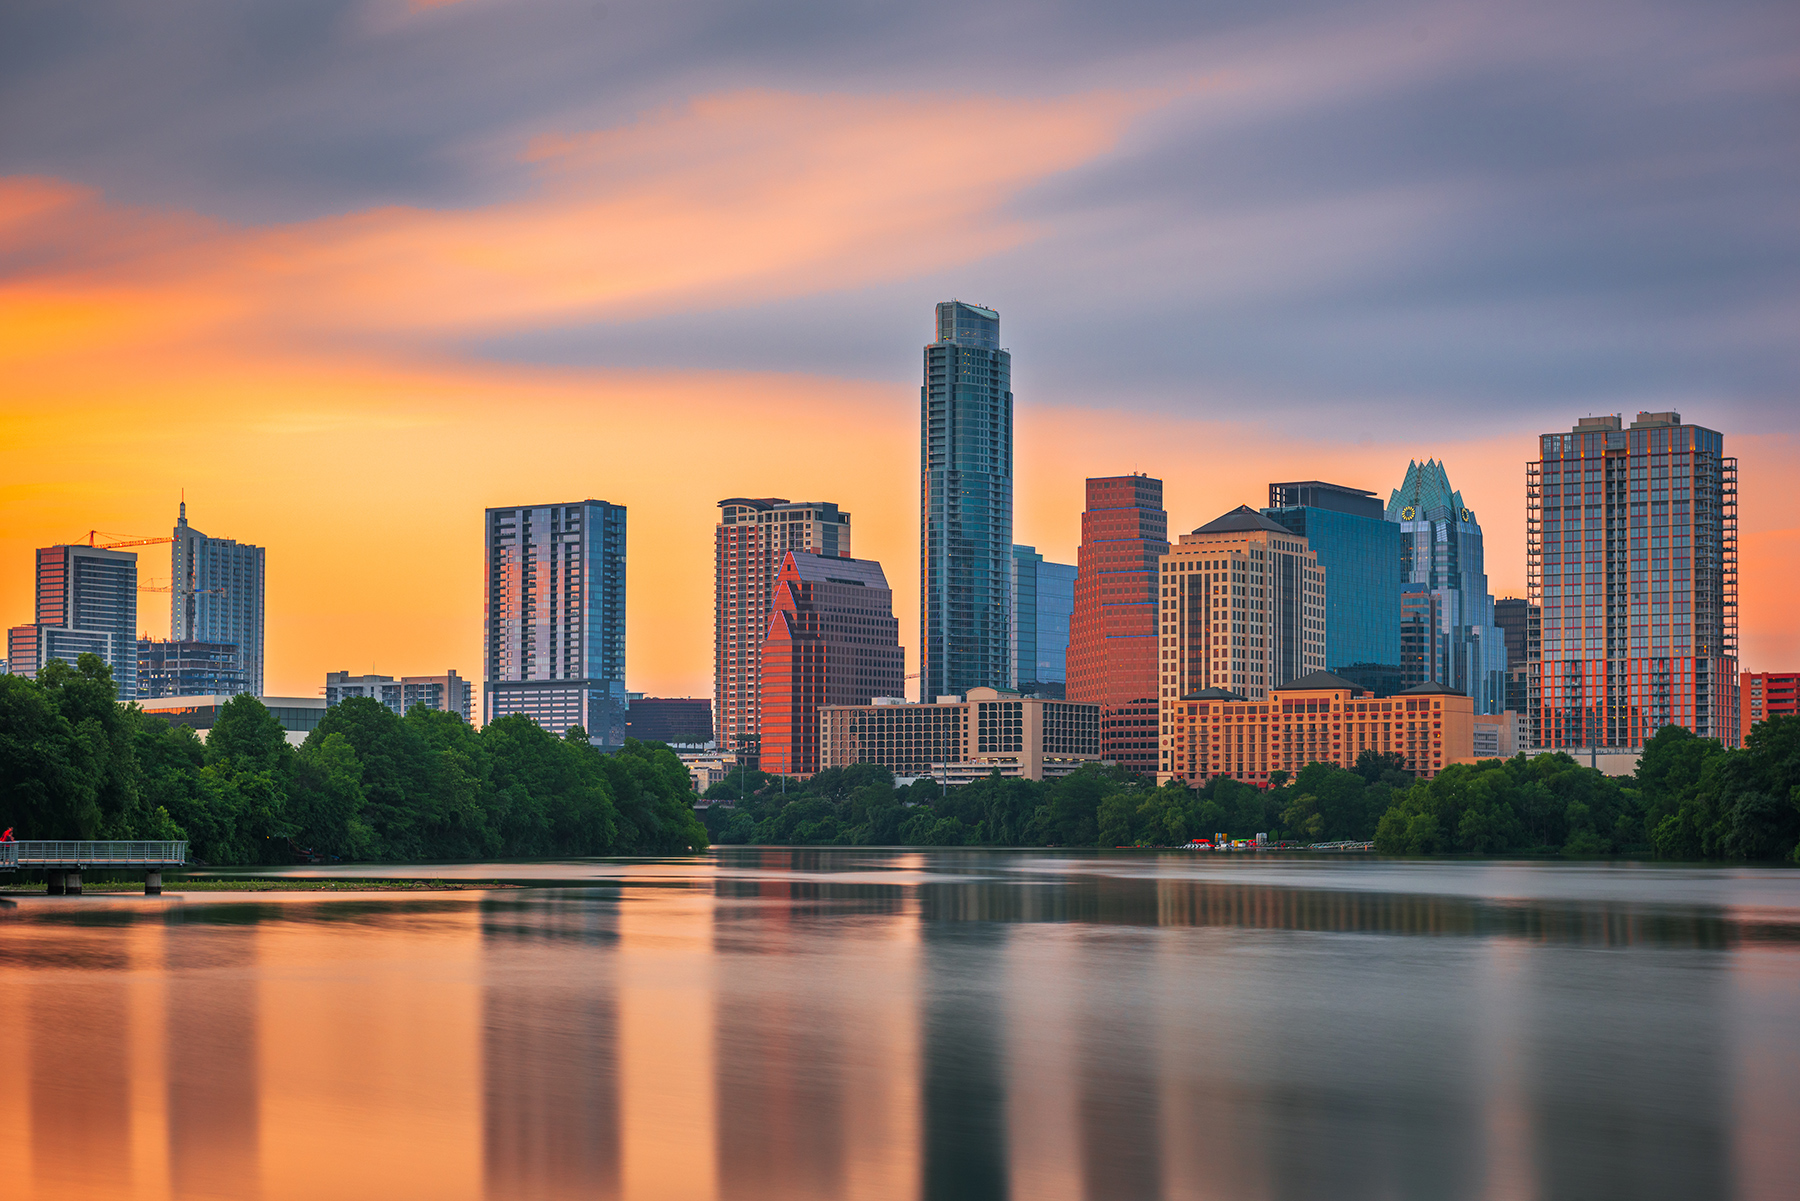 Austin skyline at sunset viewed from Lady Bird Lake and Colorado River